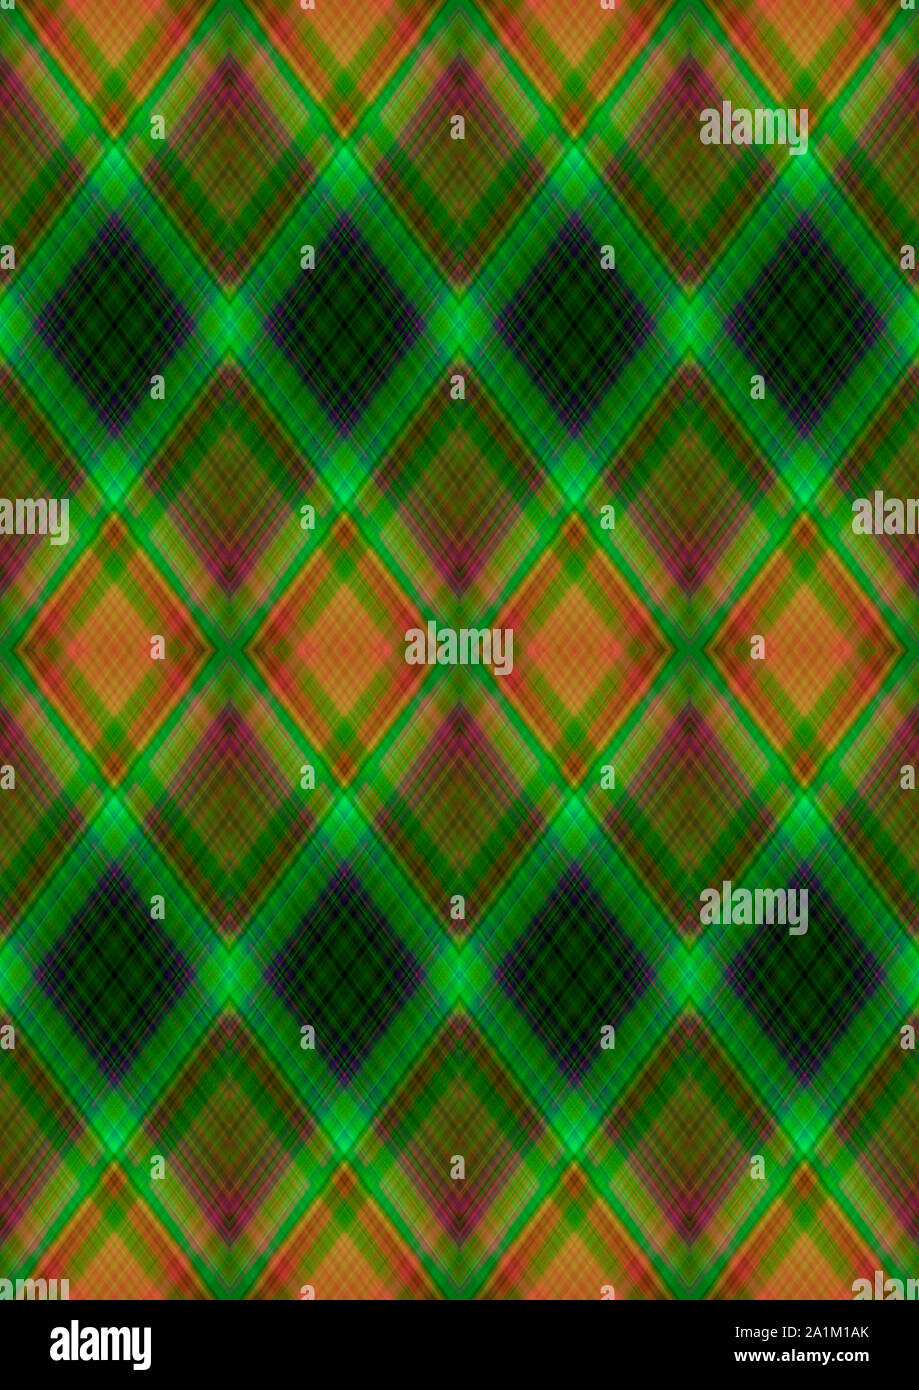 Bright seamless background in green shades with patterns of rhombuses  obtained from the intersection of magenta, orange and green stripes Stock Photo